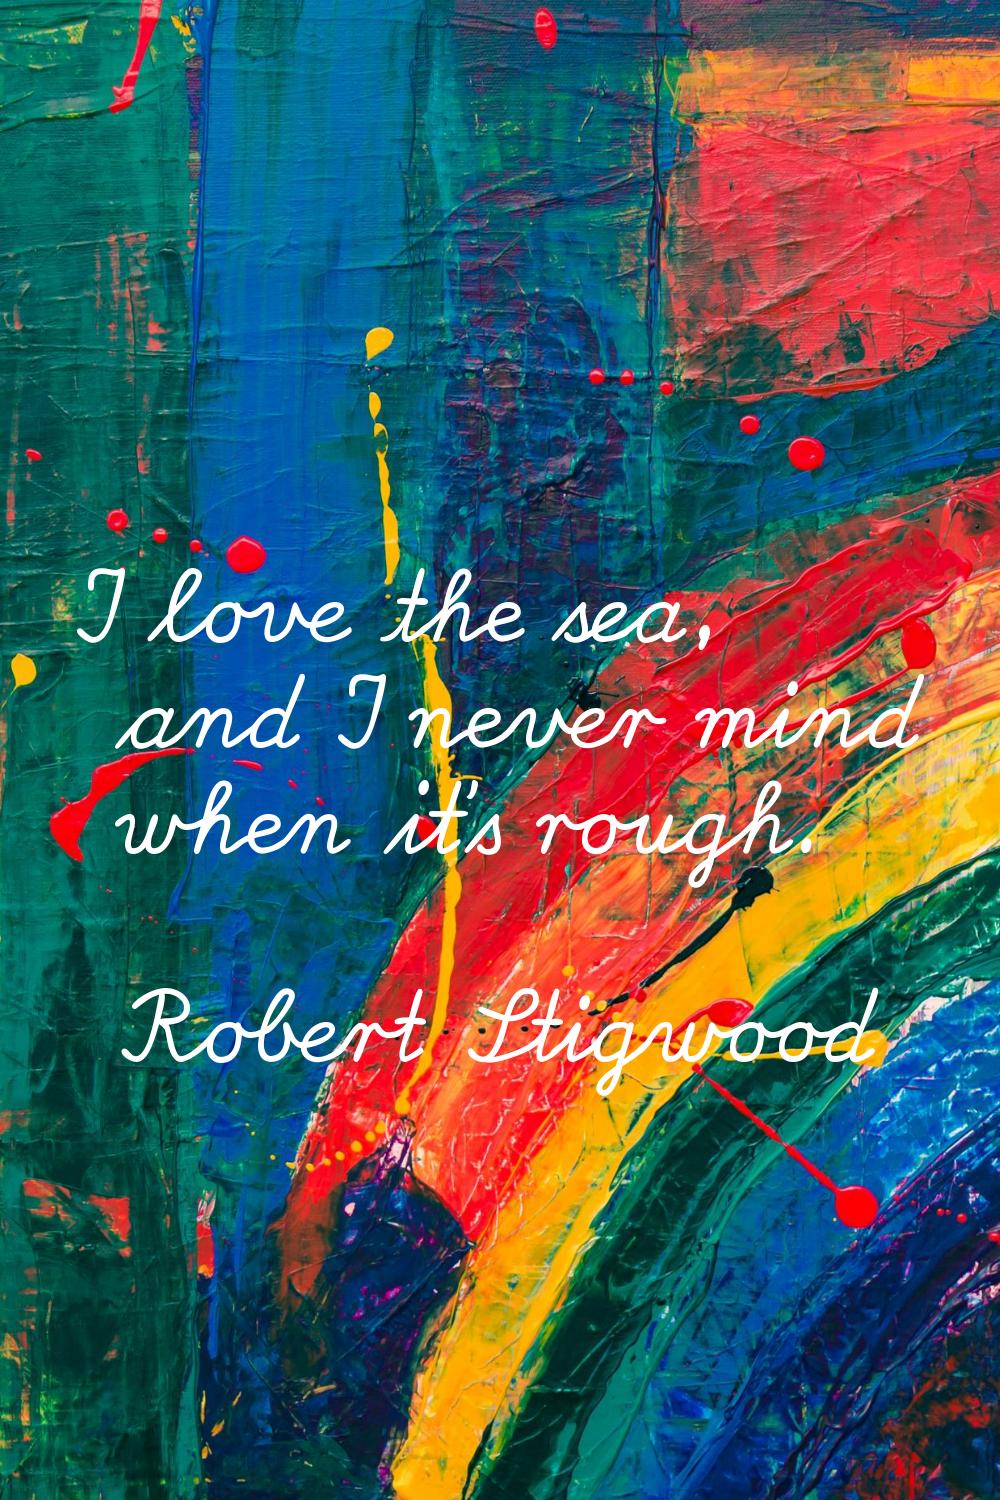 I love the sea, and I never mind when it's rough.